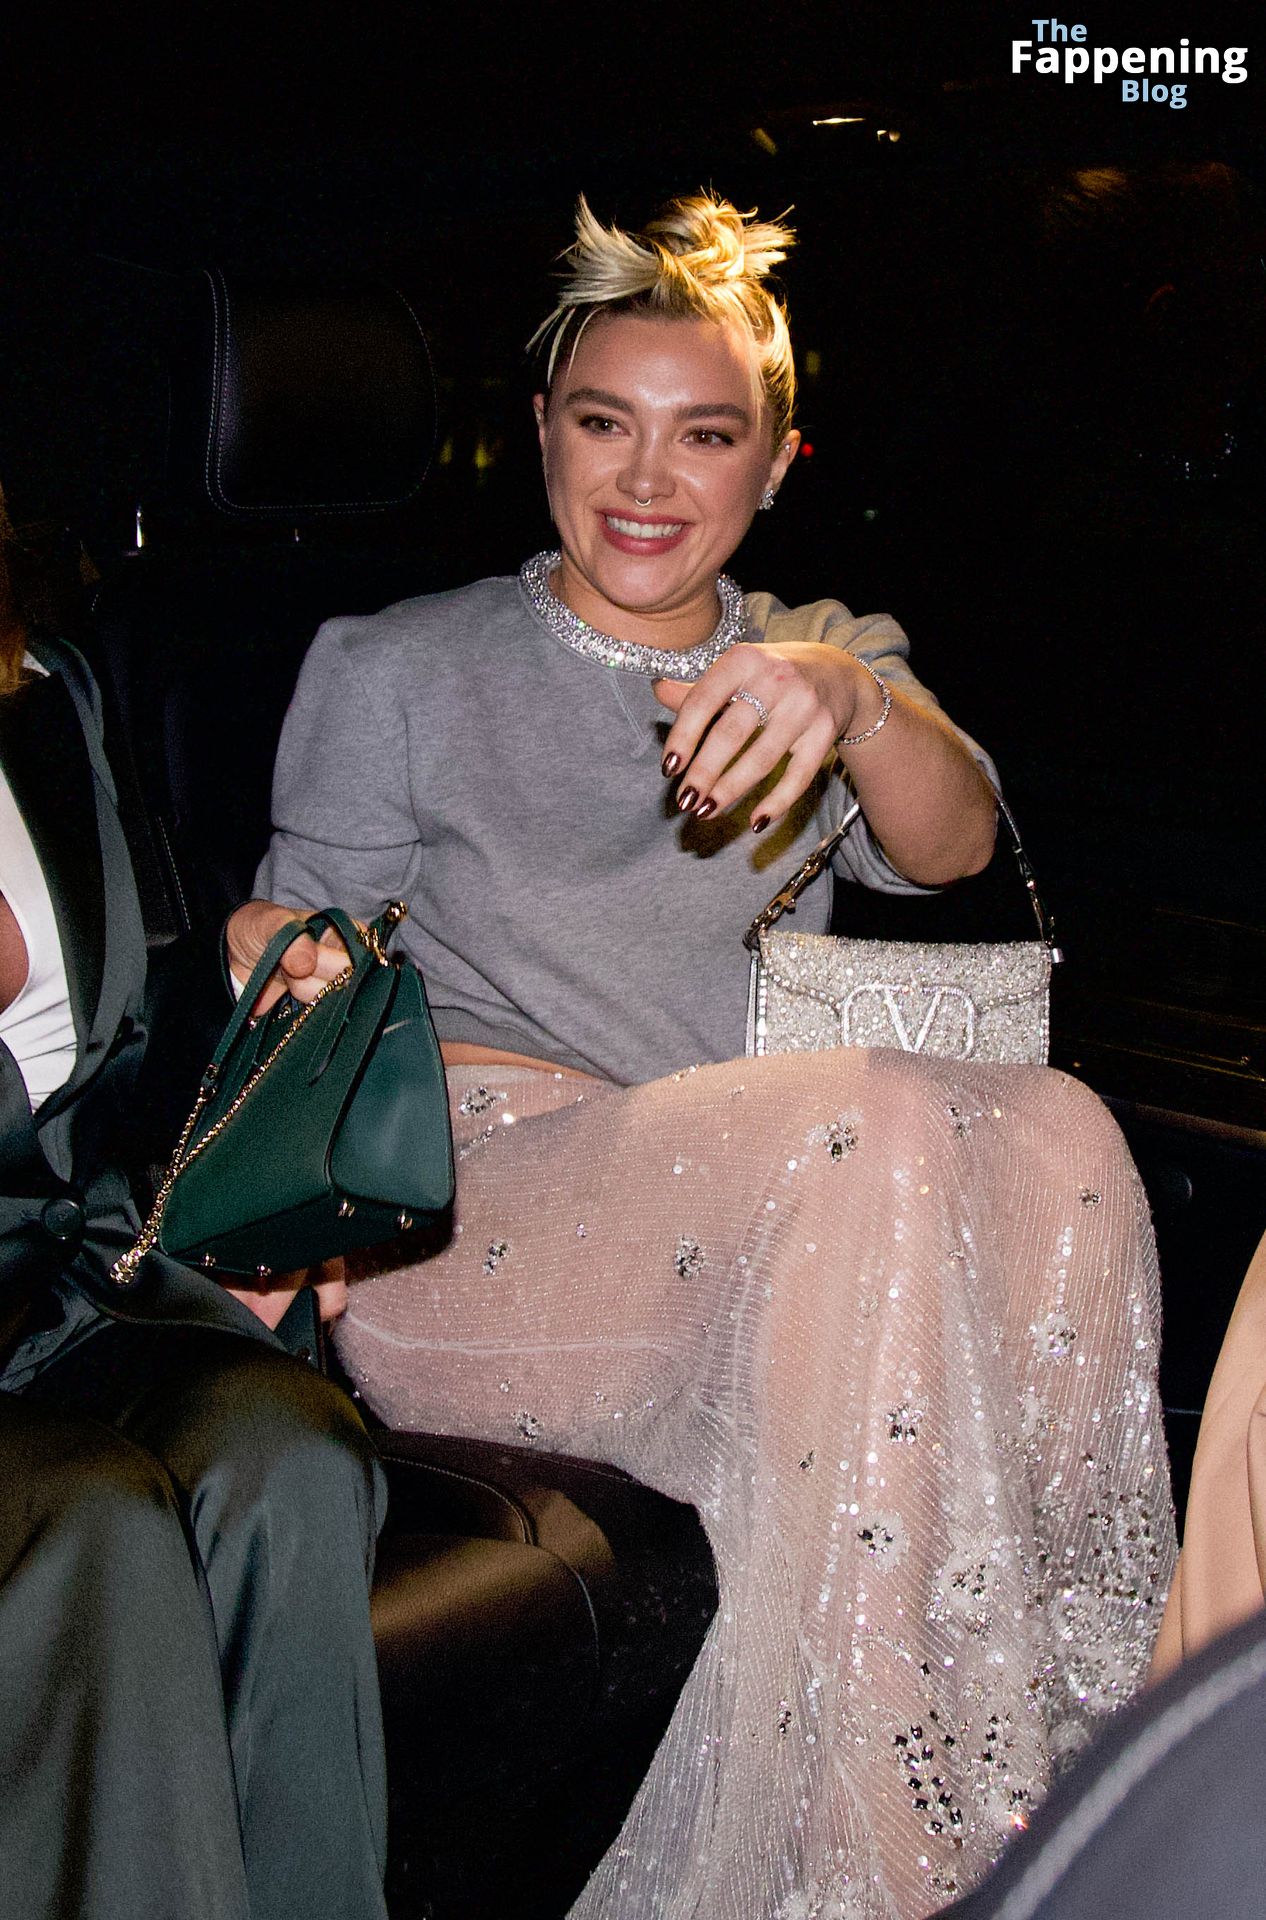 Florence-Pugh-Sexy-The-Fappening-Blog-56.jpg